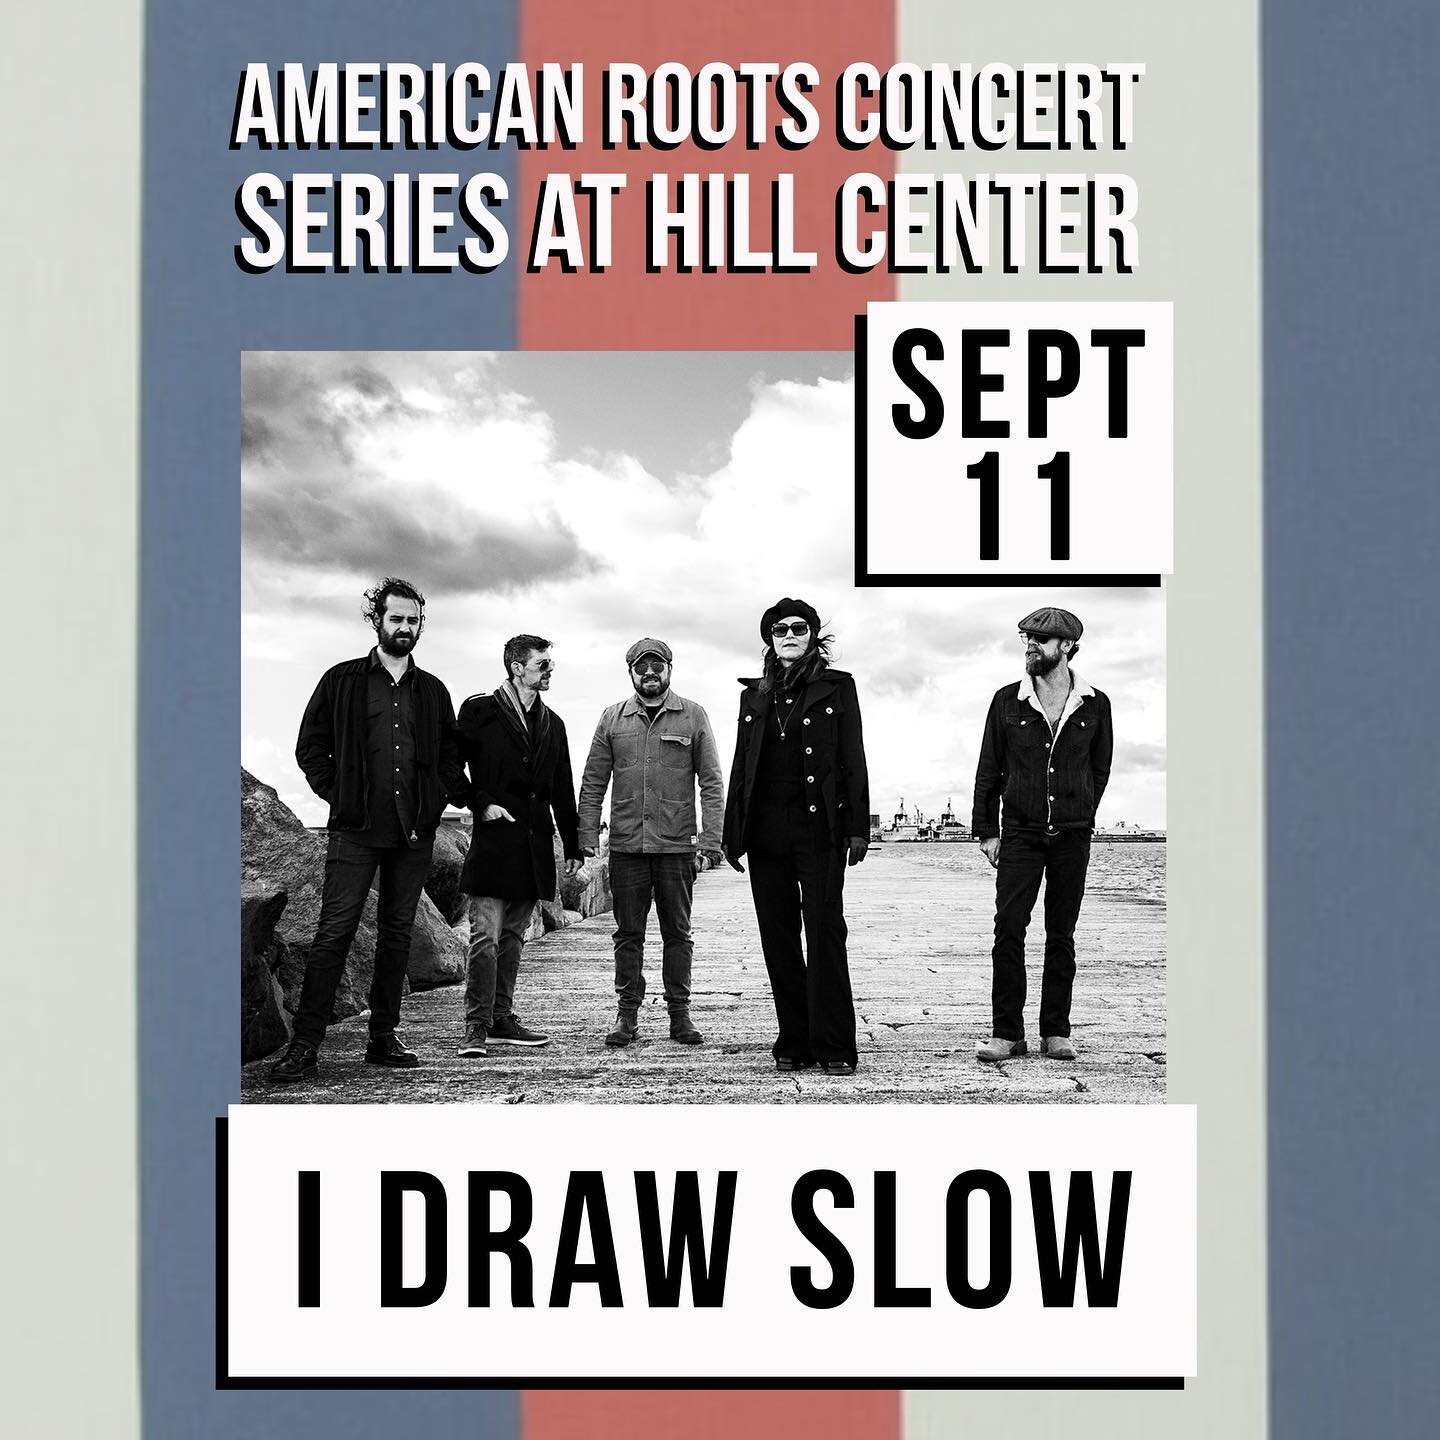 We are less than a month out from our first show of the Fall American Roots Concert Series with @idrawslow! They are making the trek all the way from Ireland to bring us an amazing night of music! You can RSVP to this free show now using the link in 